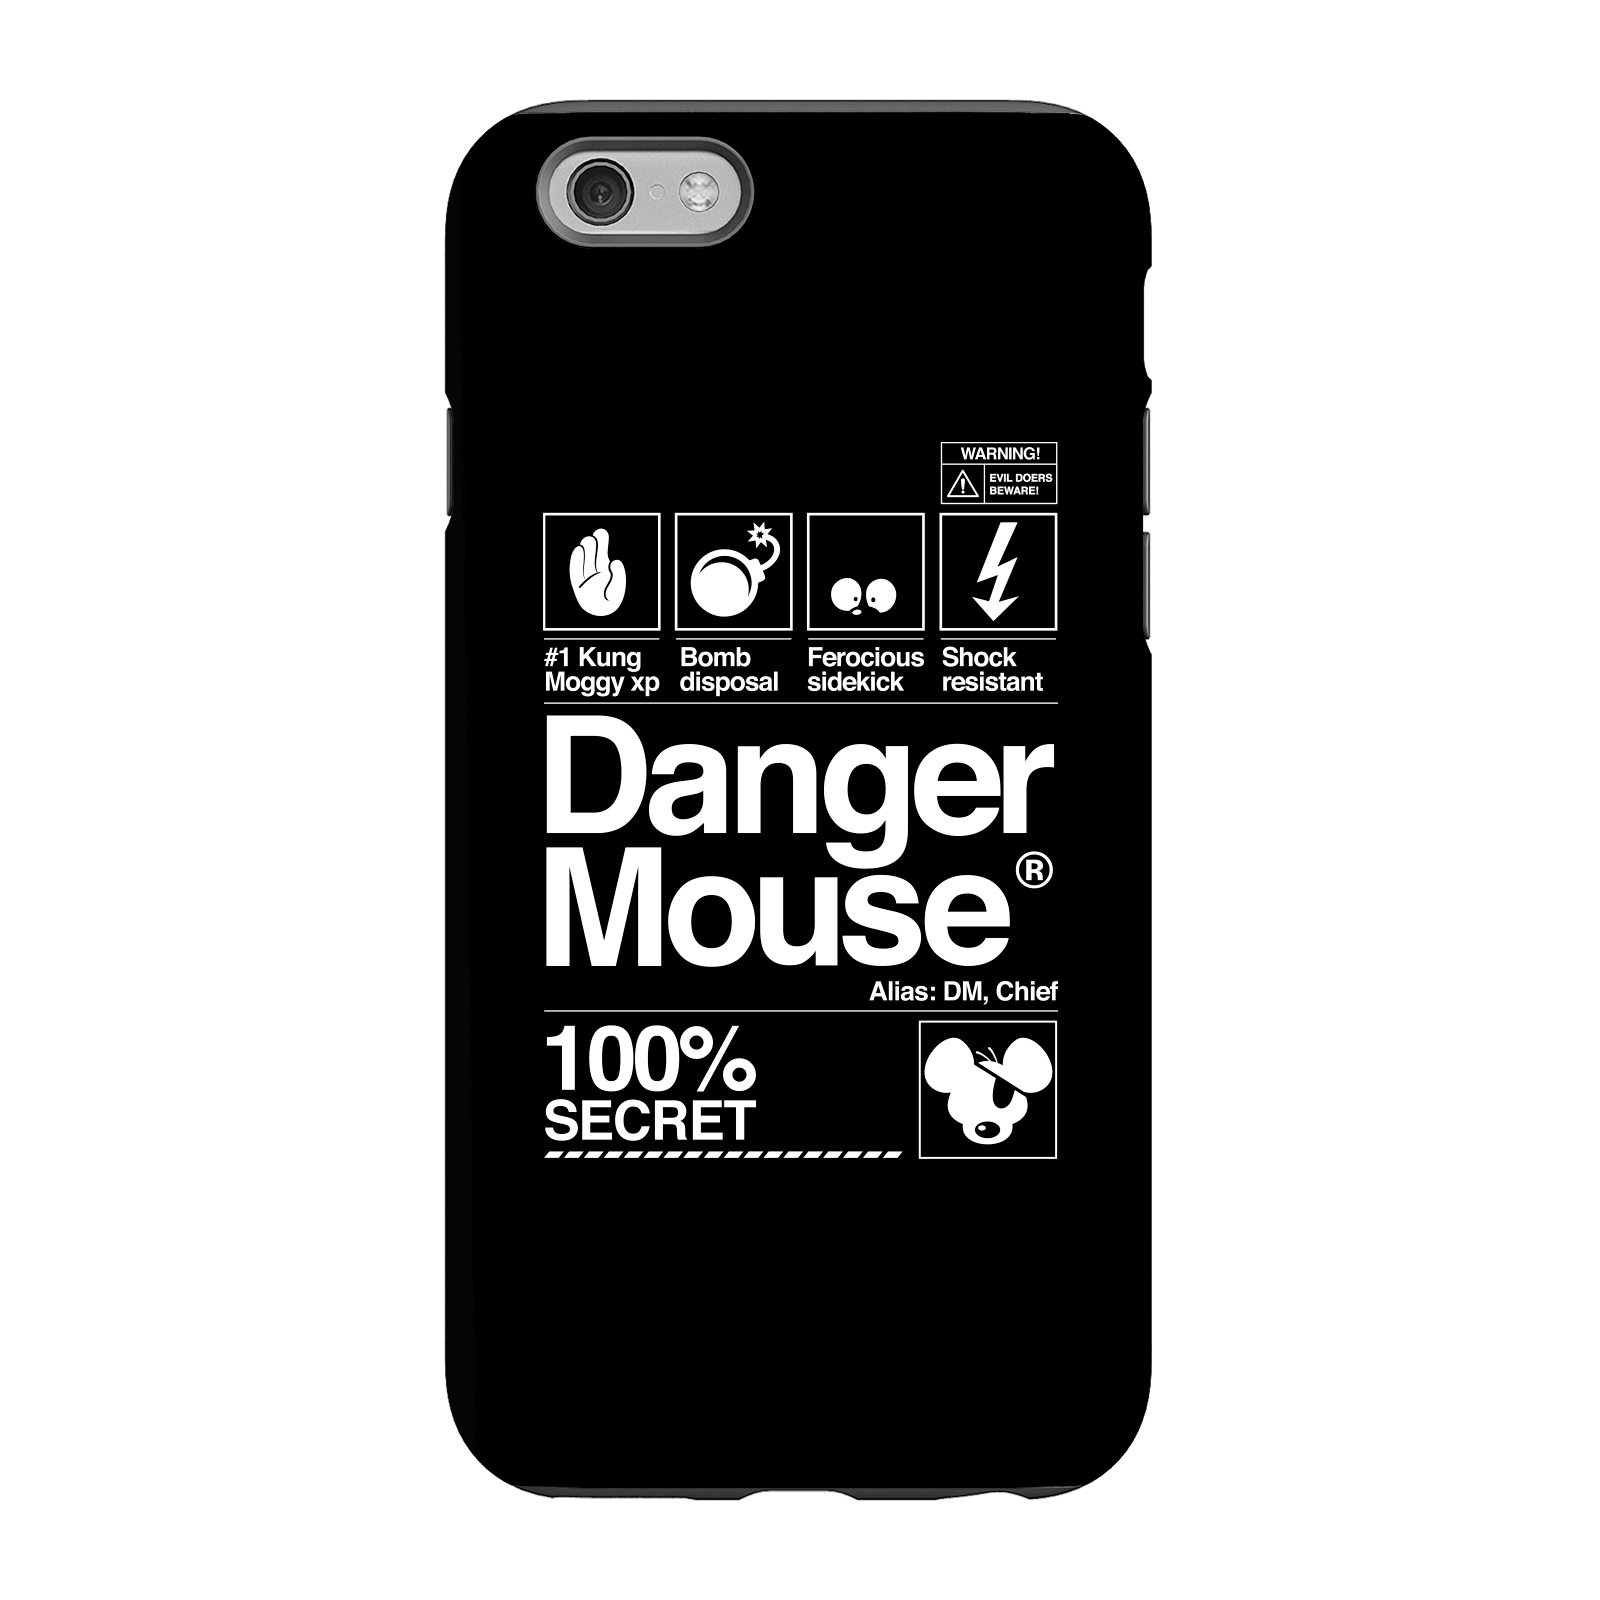 Danger Mouse 100% Secret Phone Case for iPhone and Android - iPhone 6S - Tough Case - Matte